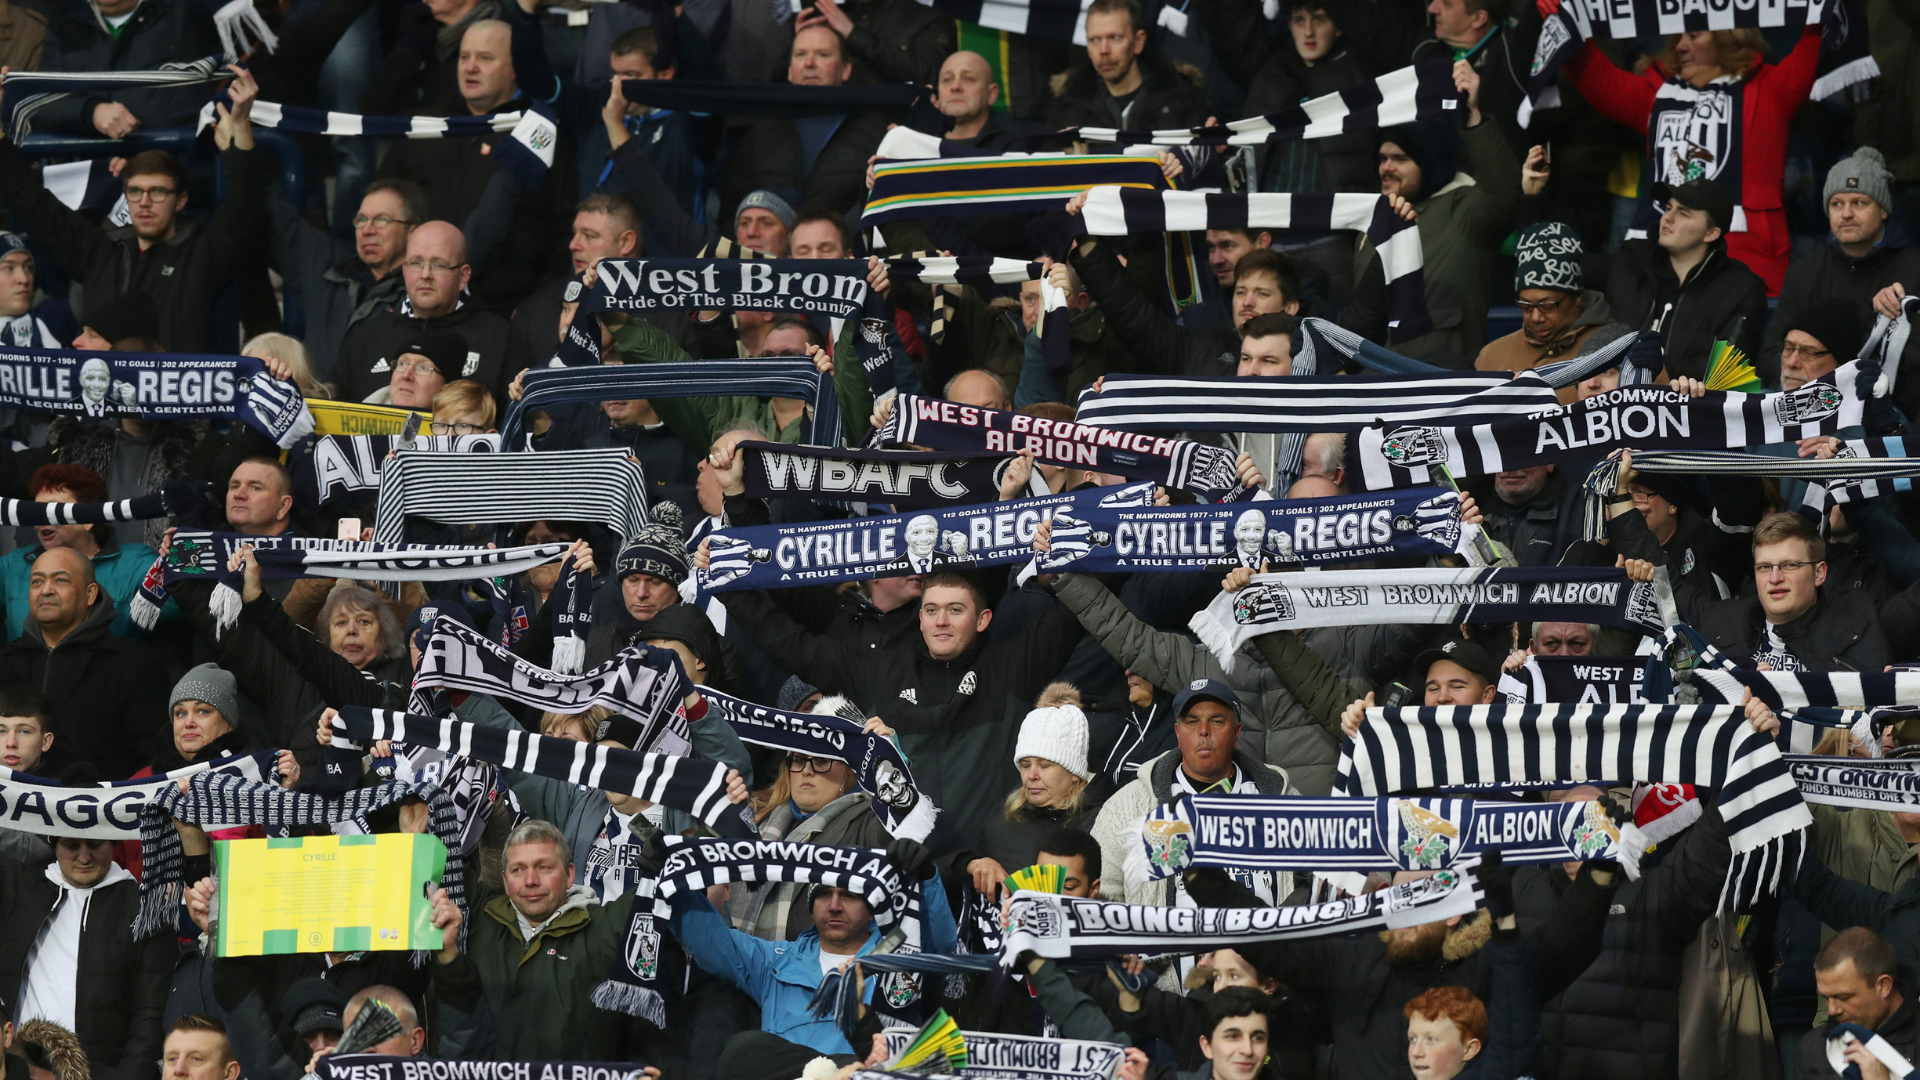 West Bromwich Albion supporters